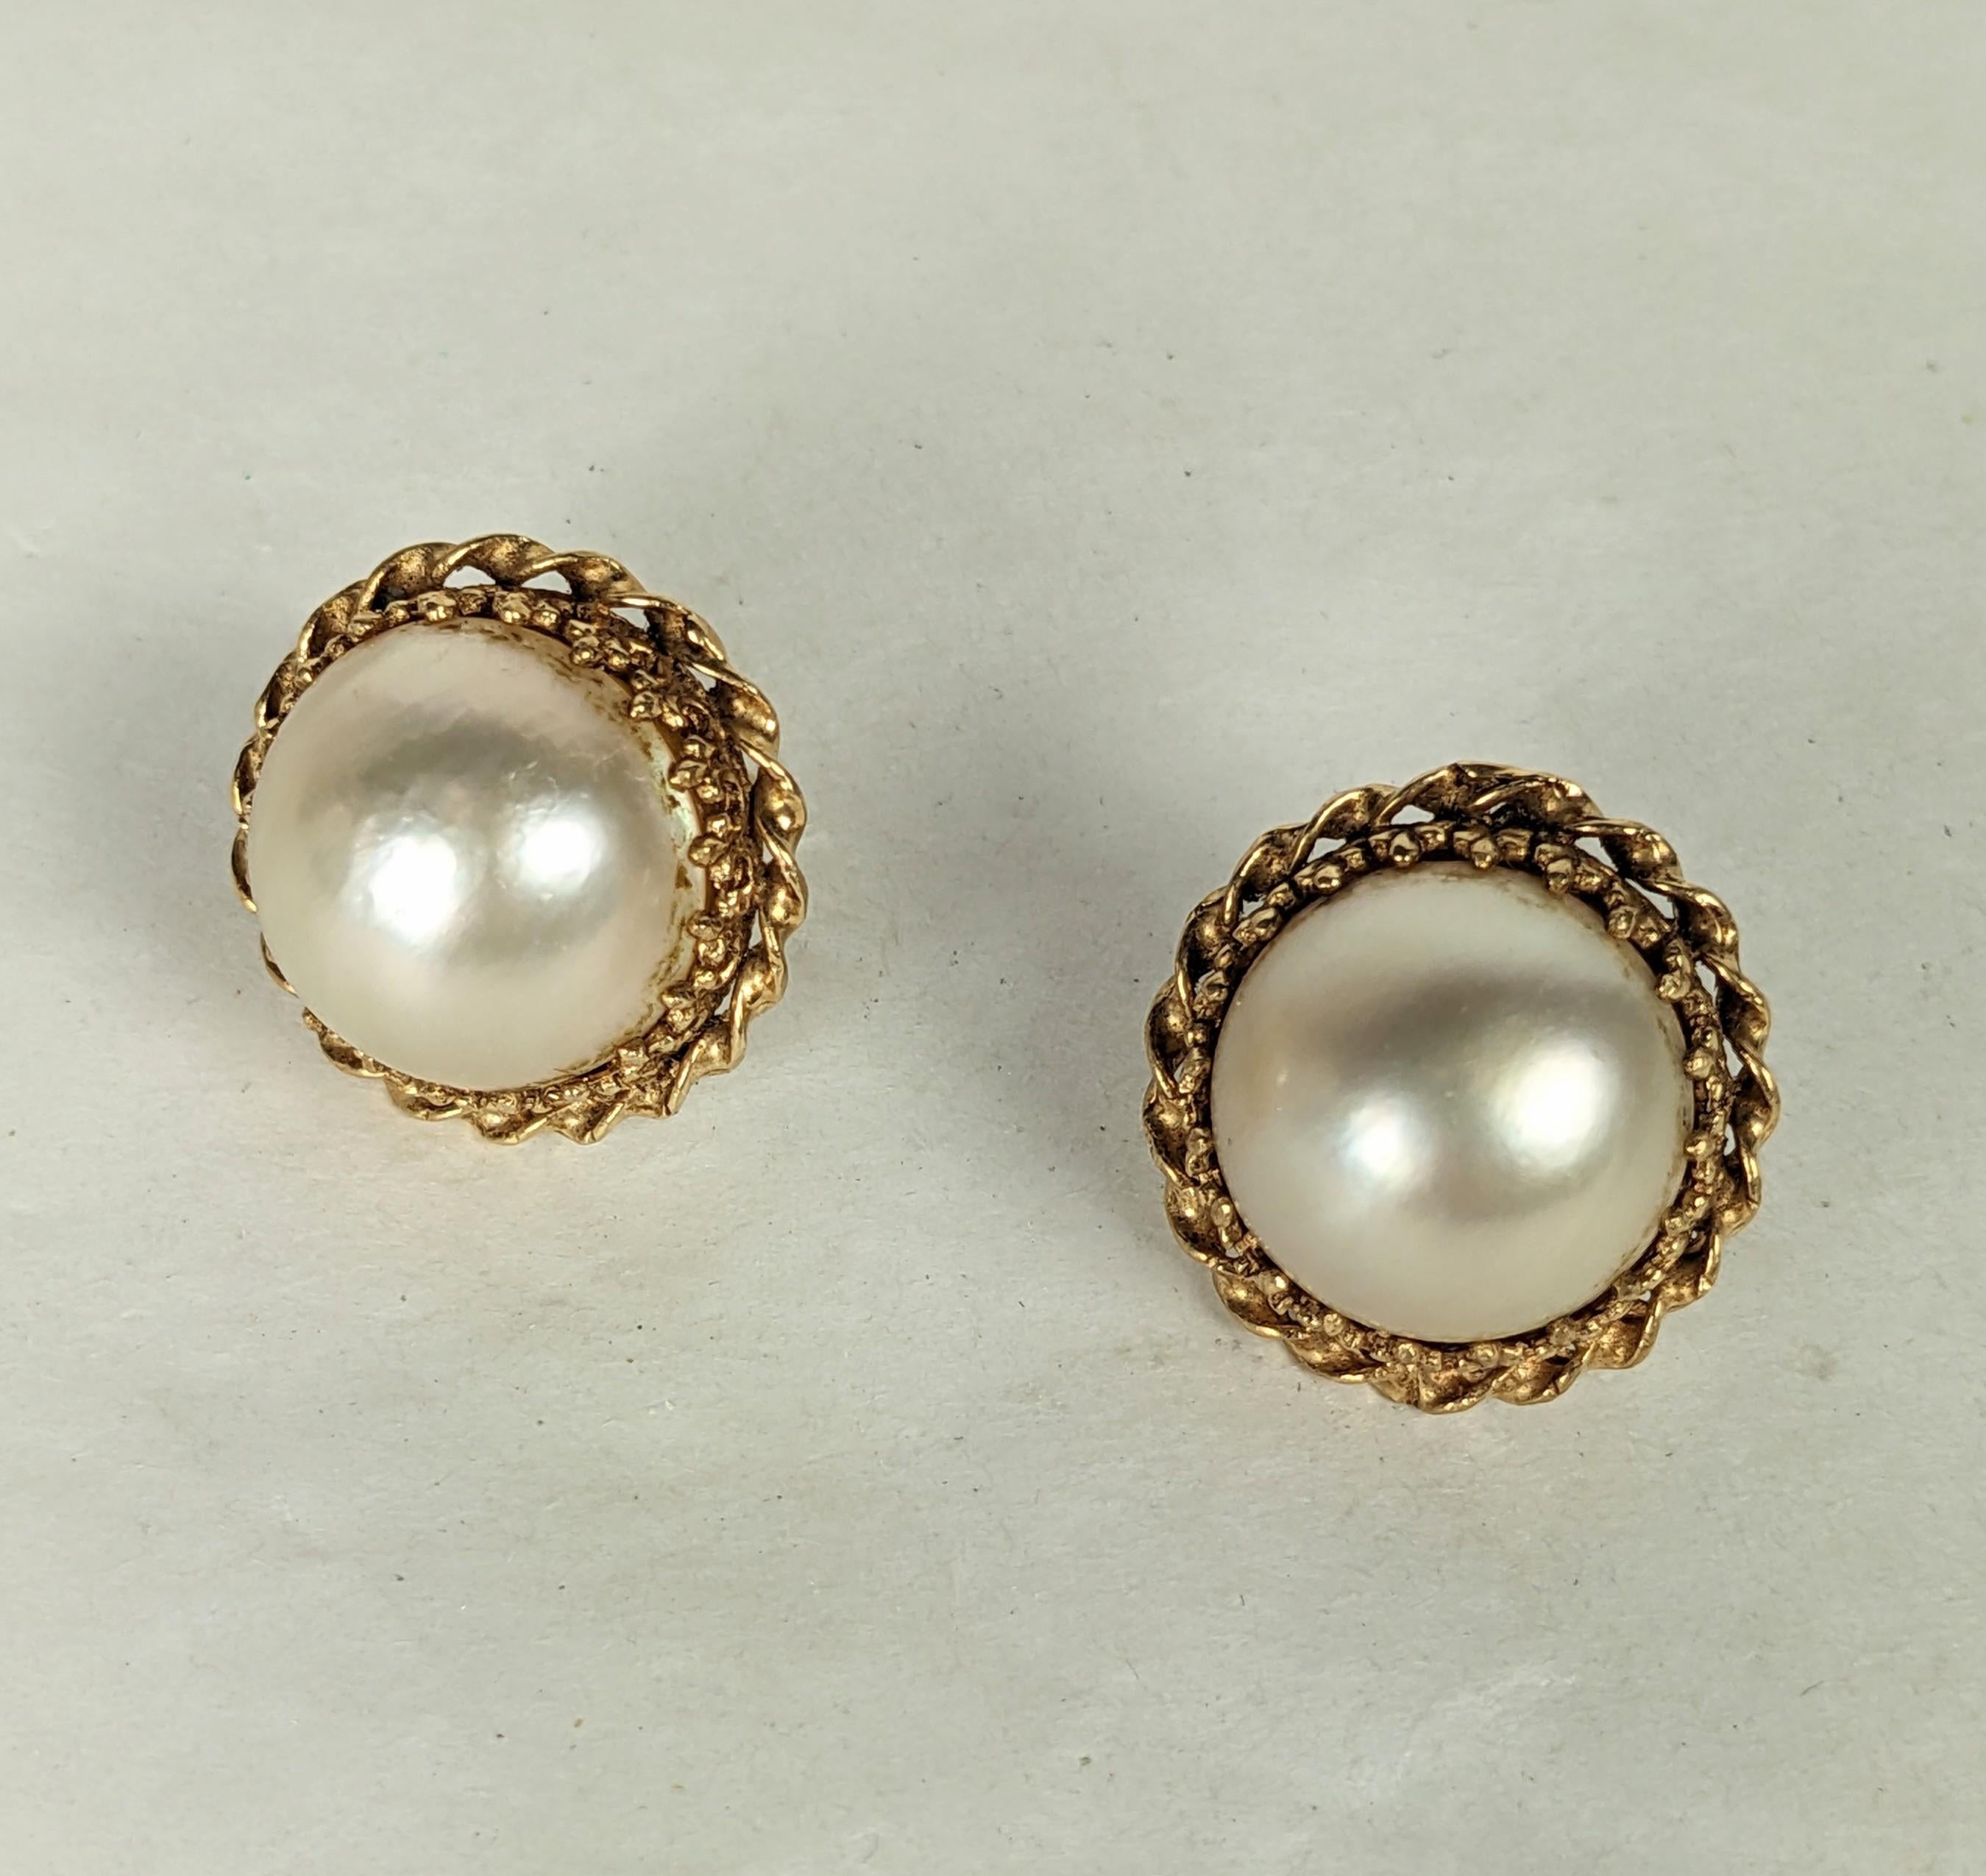 Mabe Pearl Stud Earrings from the 1960's set in 14k ornate gold twisted border. Stud fittings. .75